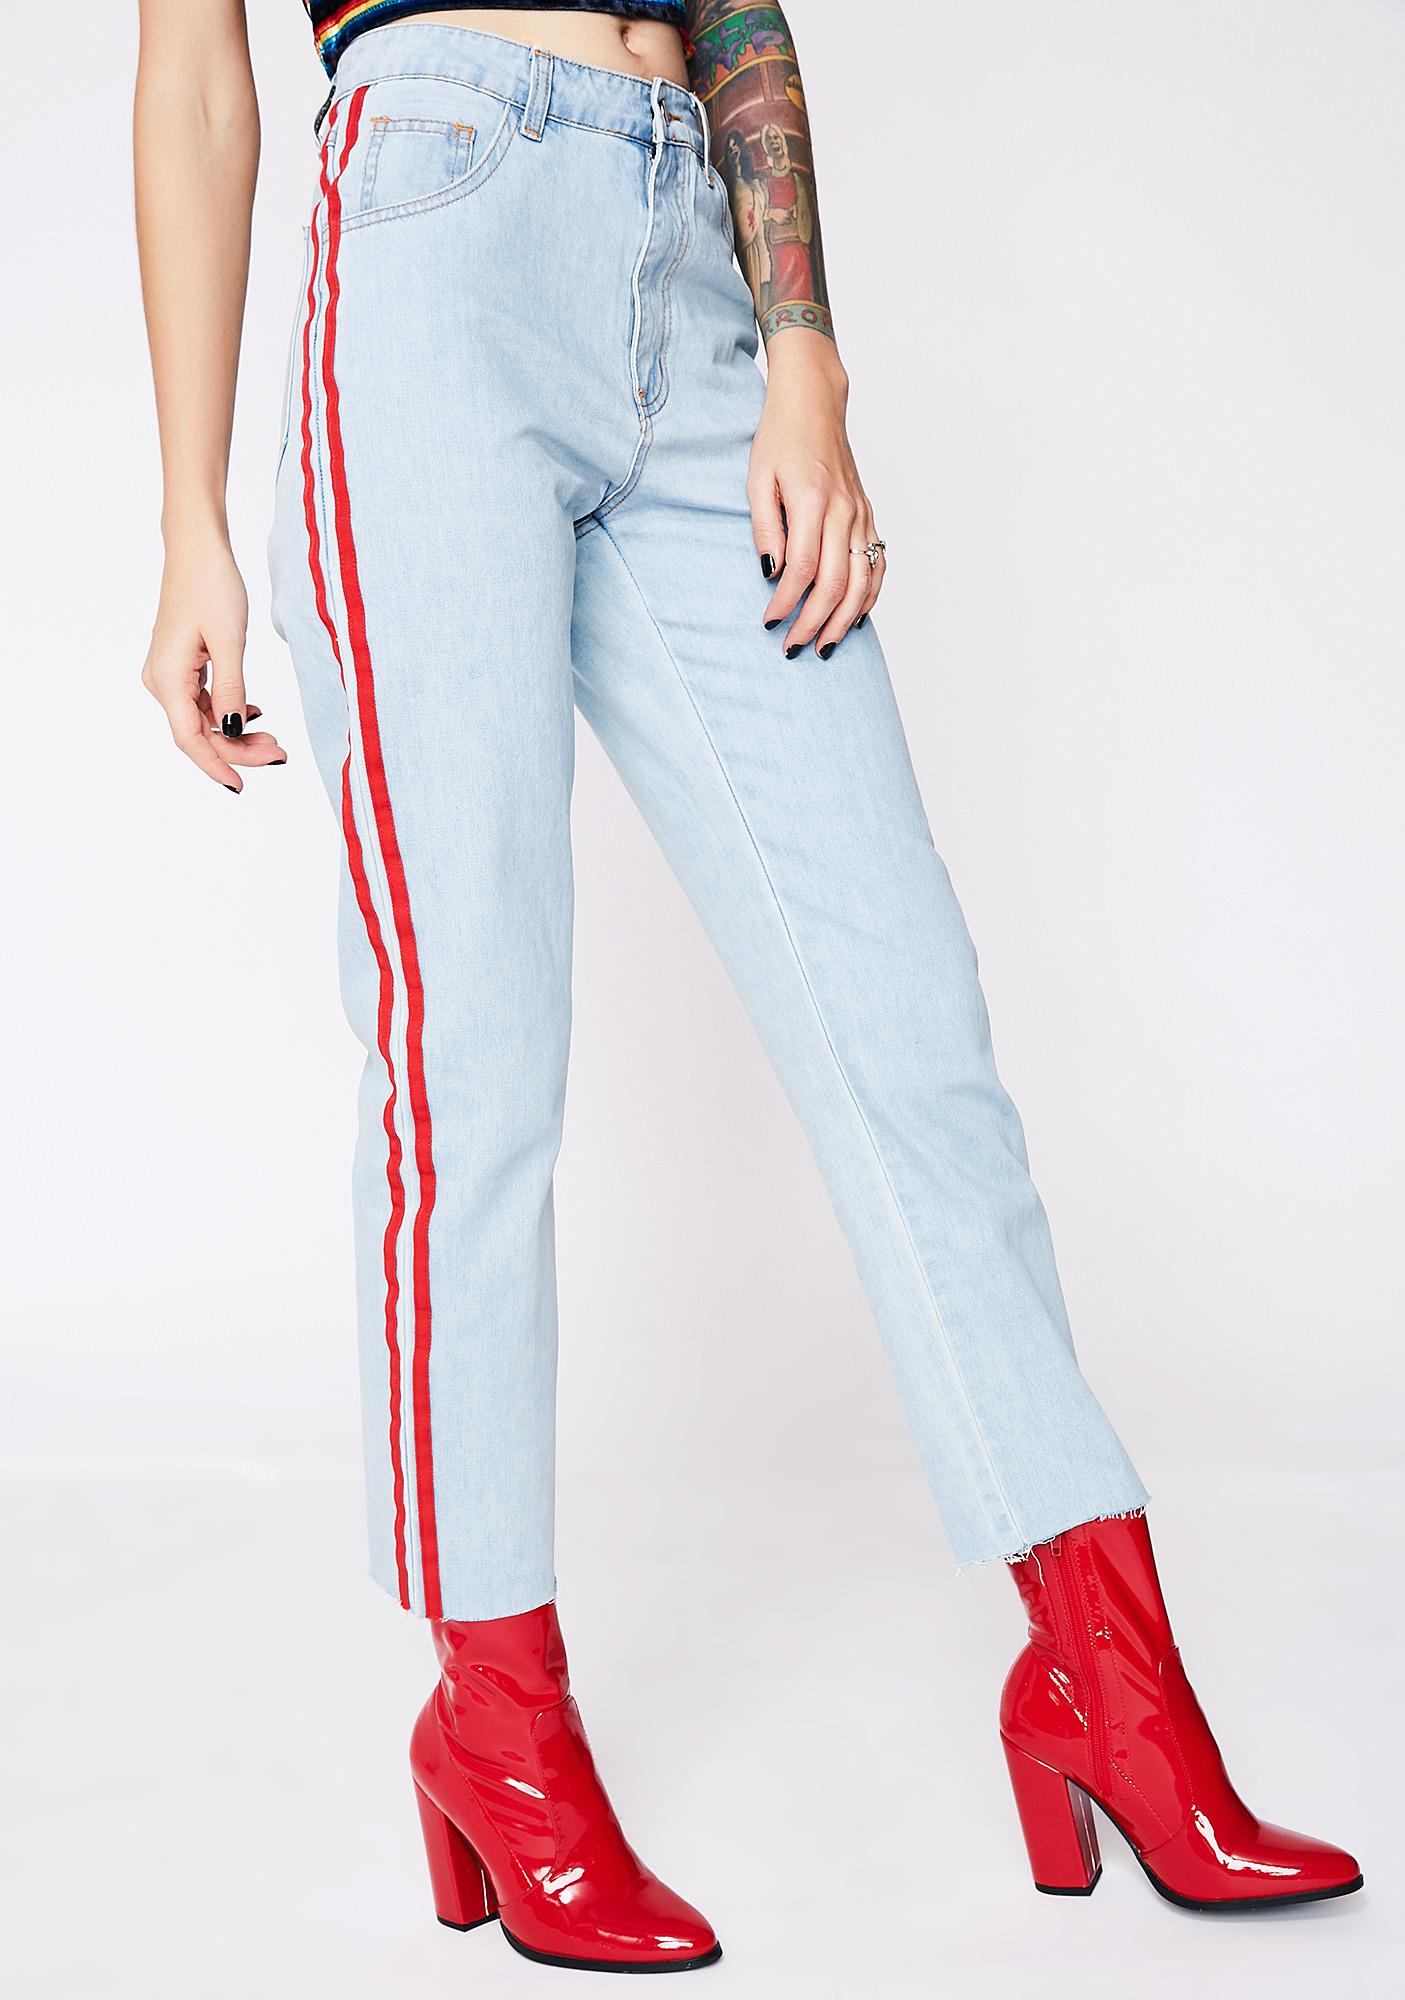 jeans with red and white stripe